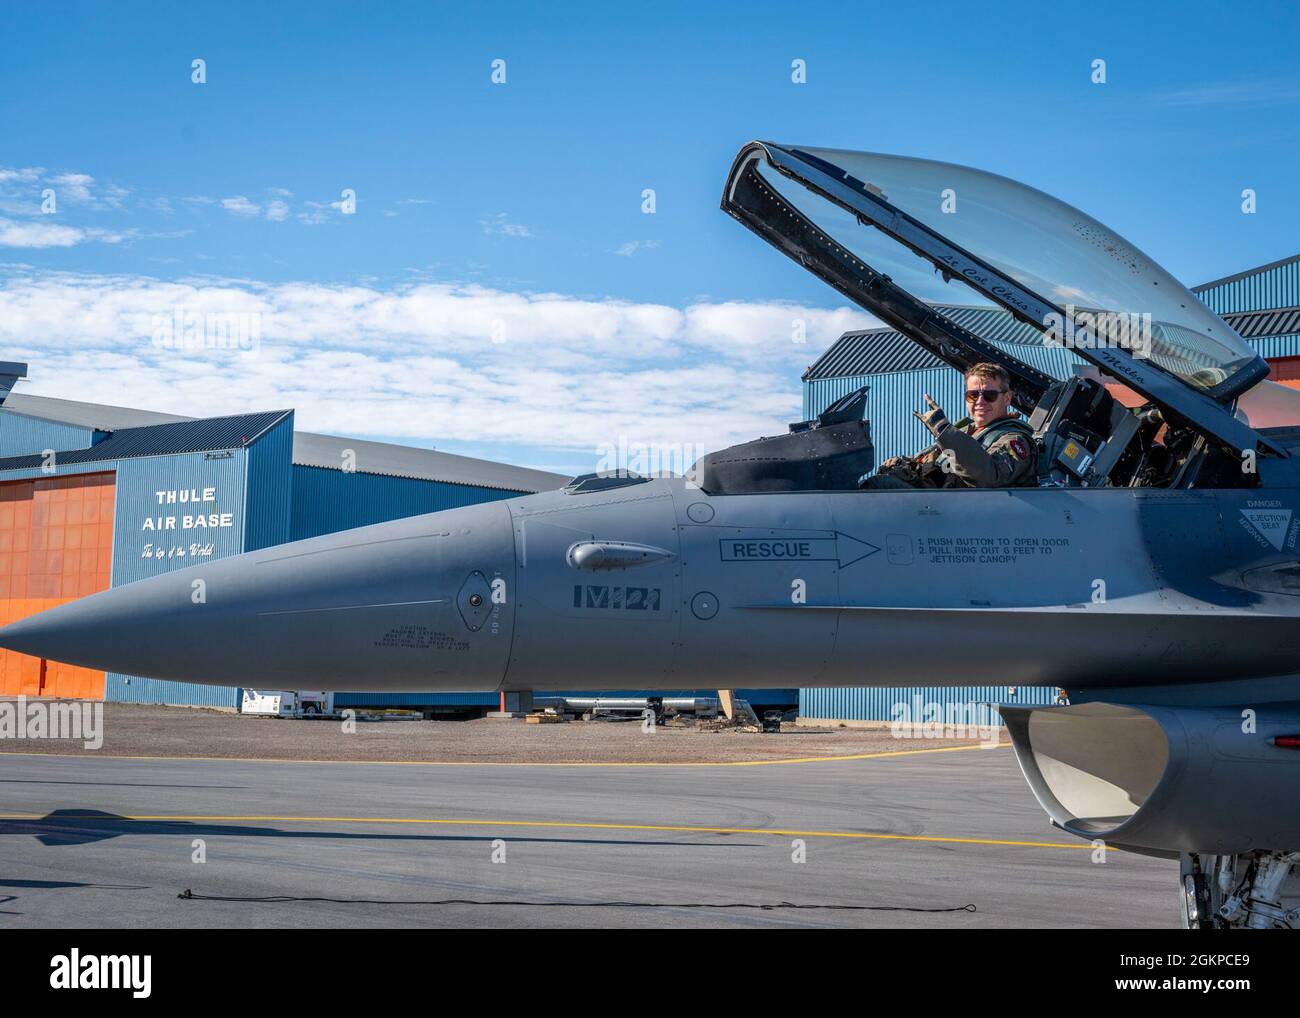 U.S. Air Force Col. Couchman, pilot with the 120th Fighter Squadron, arrives at Thule Air Base, Greenland June 11, 2021 . Exercise Amalgam Dart will run from June 10-19, 2021, with operations ranging across the Arctic from the Beaufort Sea to Thule, Greenland. Amalgam Dart 21-01 provides NORAD the opportunity to hone continental defense skills as Canadian and U.S. forces operate together in the Arctic. A bi-national Canadian and Ameican command, NORAD employs a network of space-based aerial and ground-based sensors, air-to-air refueling tankers, and fighter aircraft, controlled by a sophistica Stock Photo